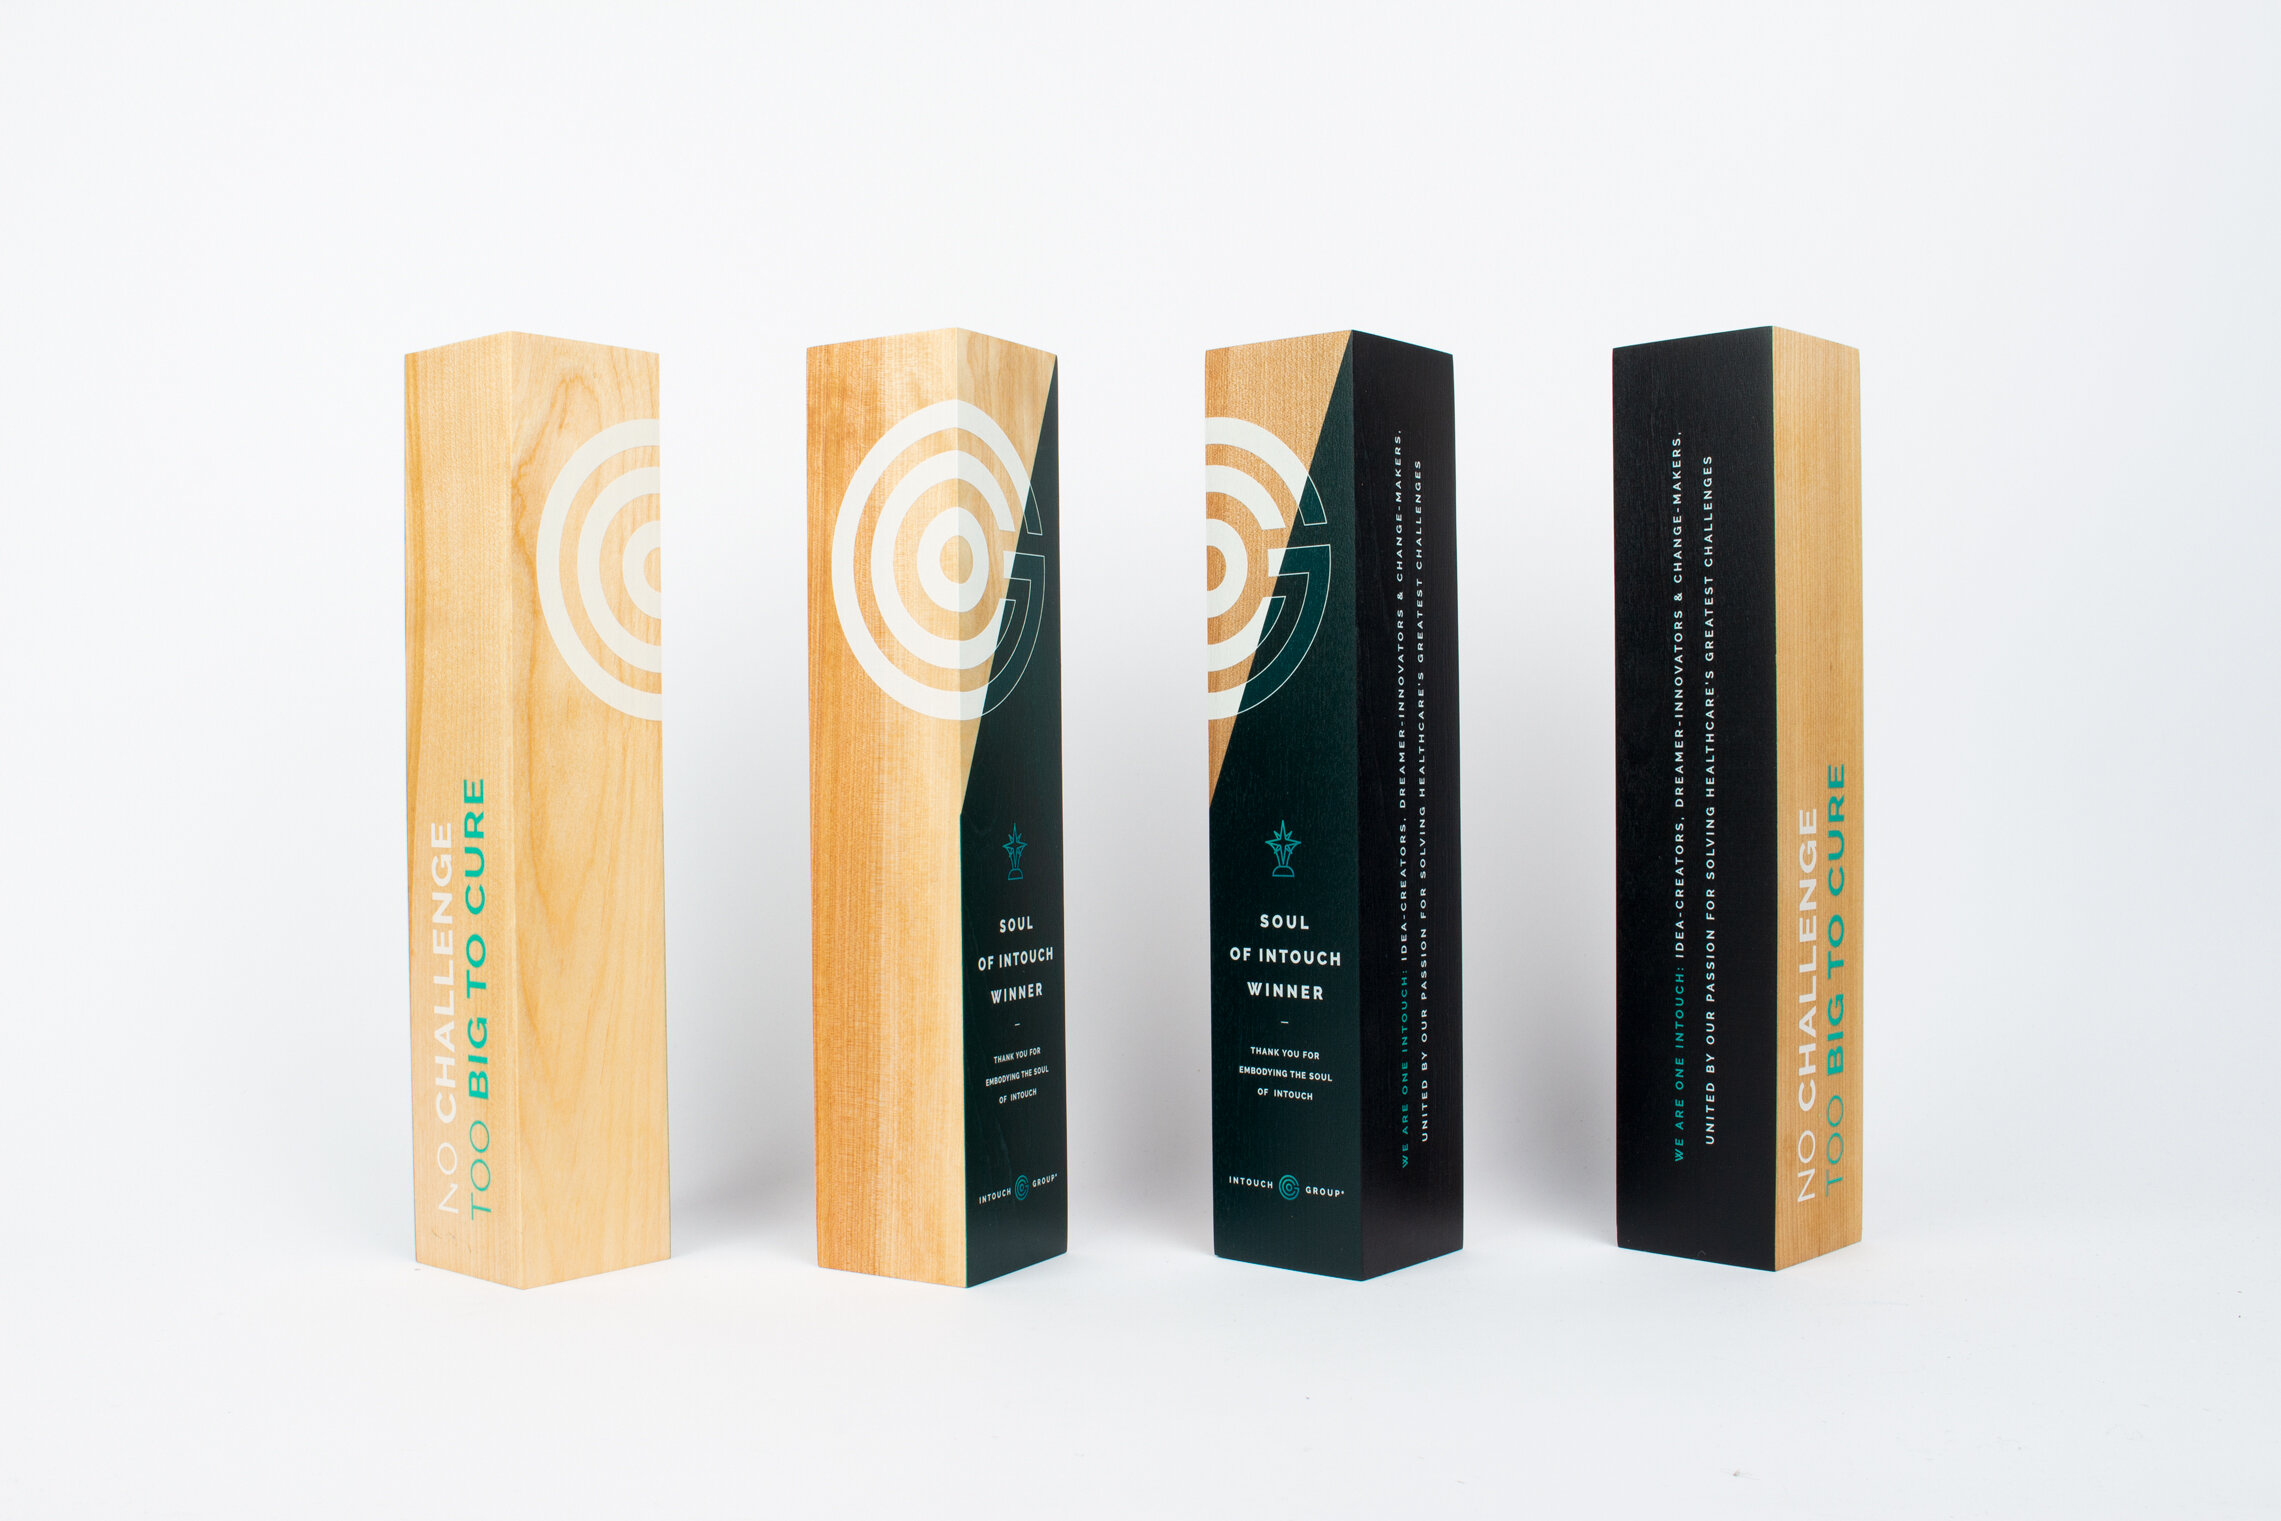 intouch group modern wooden awards